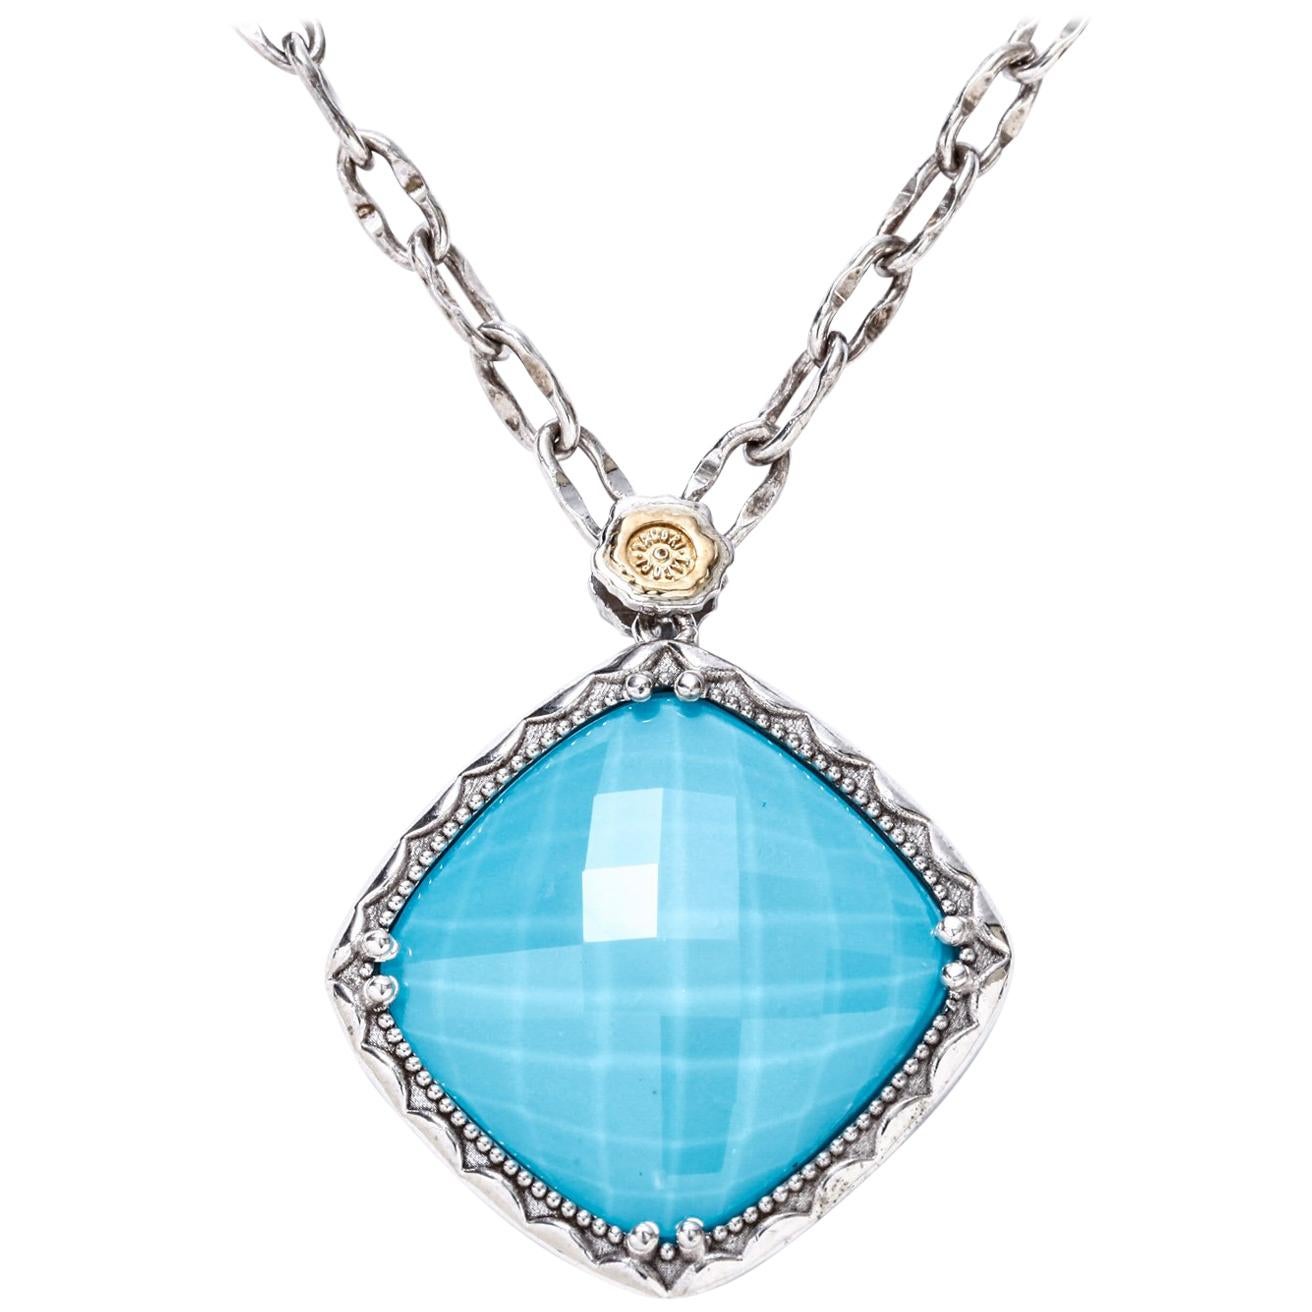 Tacori Silver Turquoise & Clear Quartz Pendant Necklace 18k Yellow Gold SN13305 For Sale